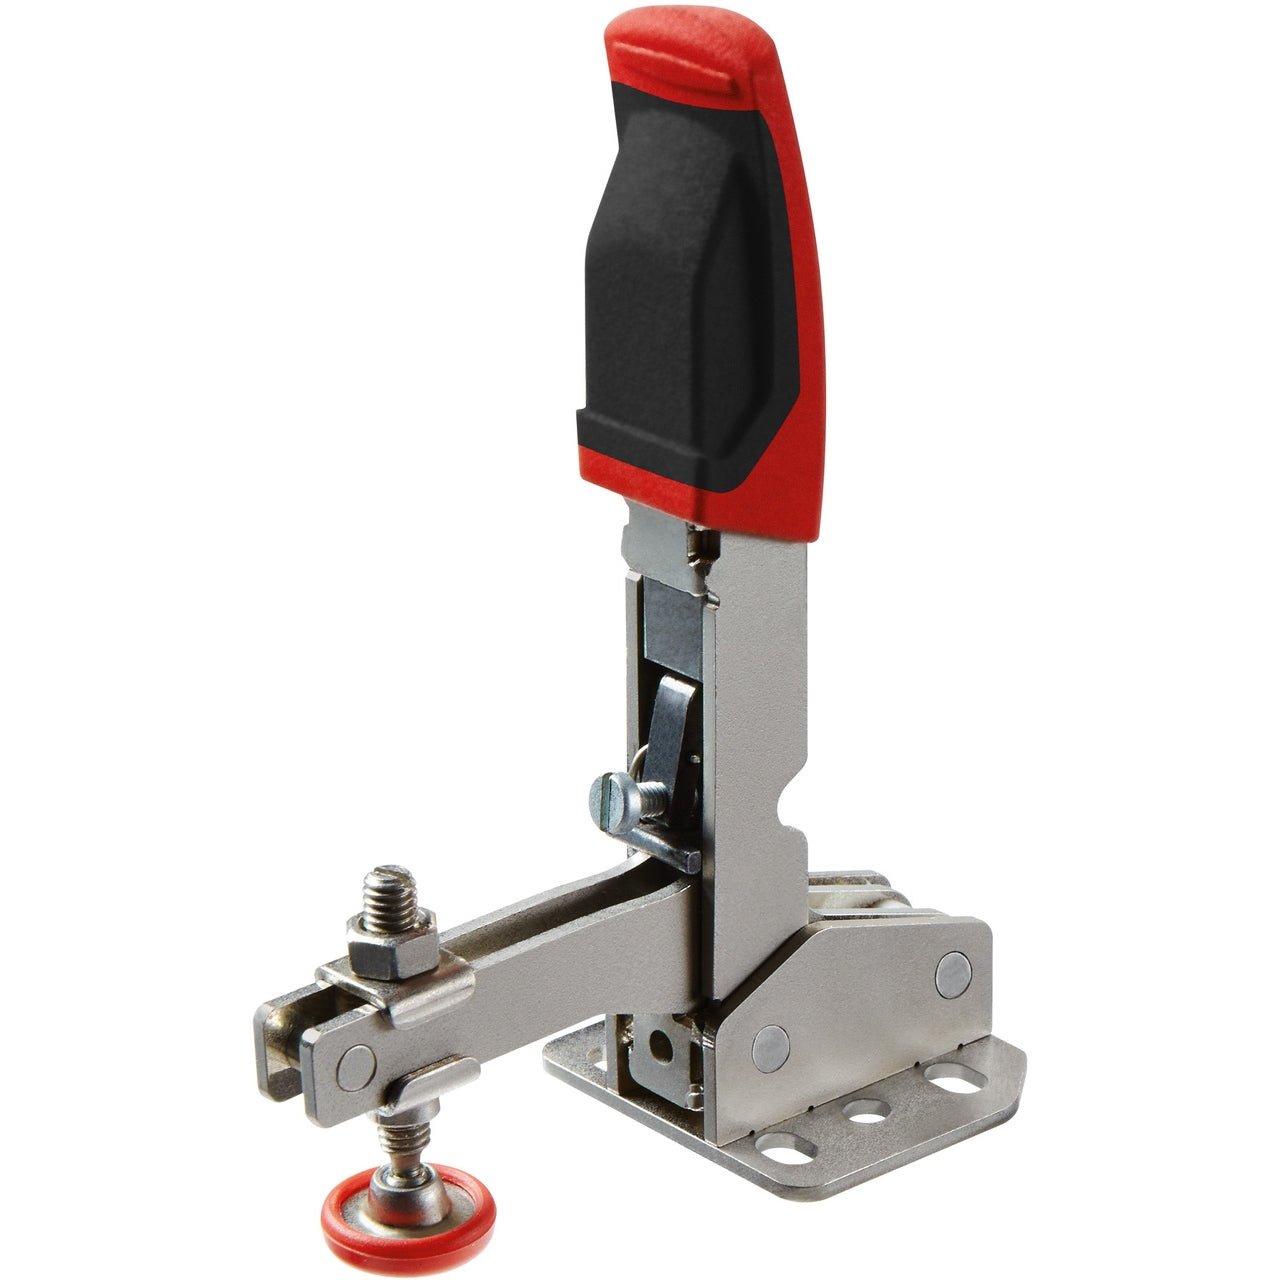 Bessey STC-VH50  -  Vertical Auto-Adjust Toggle Face Mount Nickel Plated Clamp Vertical Flange, Silv; Vertical Auto-Adjust Toggle Face Mount Nickel Plated Clamp Vertical Flange, Silver